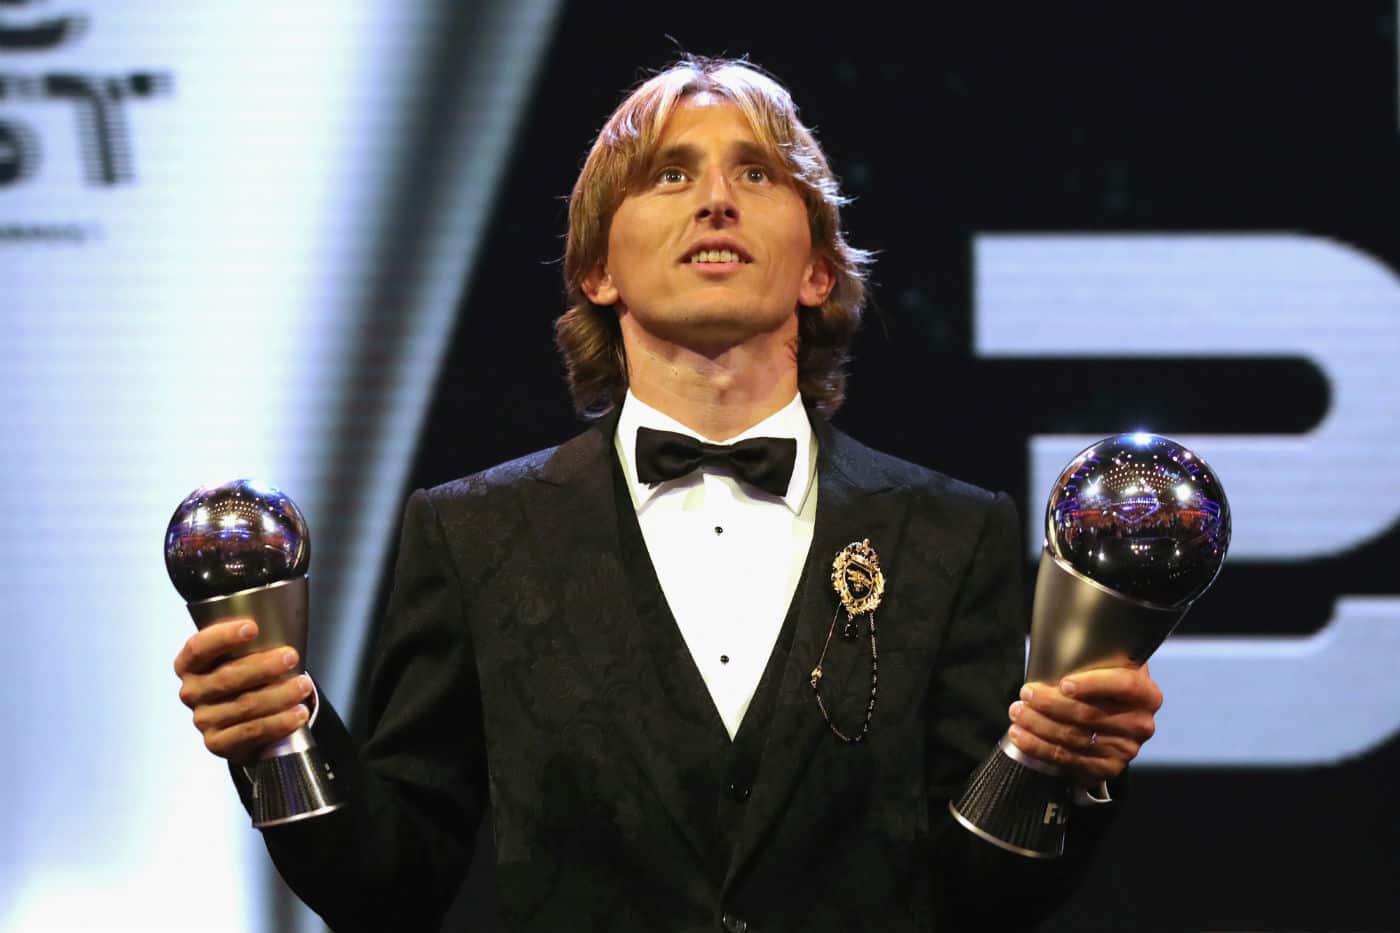 Real Madrid to not renew contract of Luka Modric